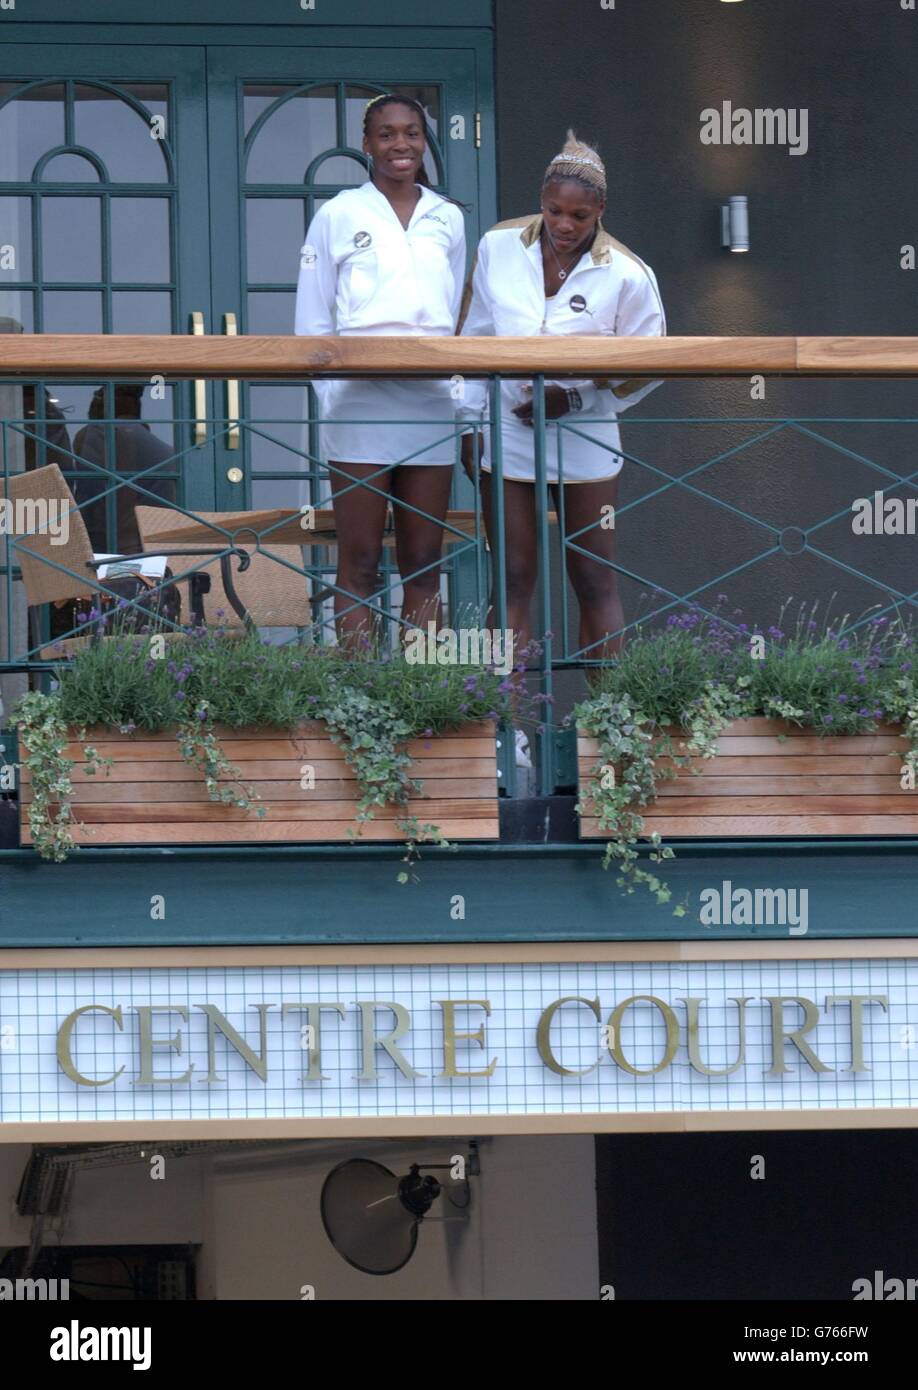 Wimbledon Ladies' Doubles and Singles Champions Serena (right) and Venus Williams from the USA take in the view from the Centre Court members only balcony at The All England Lawn Tennis Club. * The sisters won the Ladies' Doubles Final today, and Serena beat Venus in the Ladies' Final yesterday. Venus Williams has won the singles title in both 2000 and 2001. Champions are rewarded with life membership to the famous club. Stock Photo